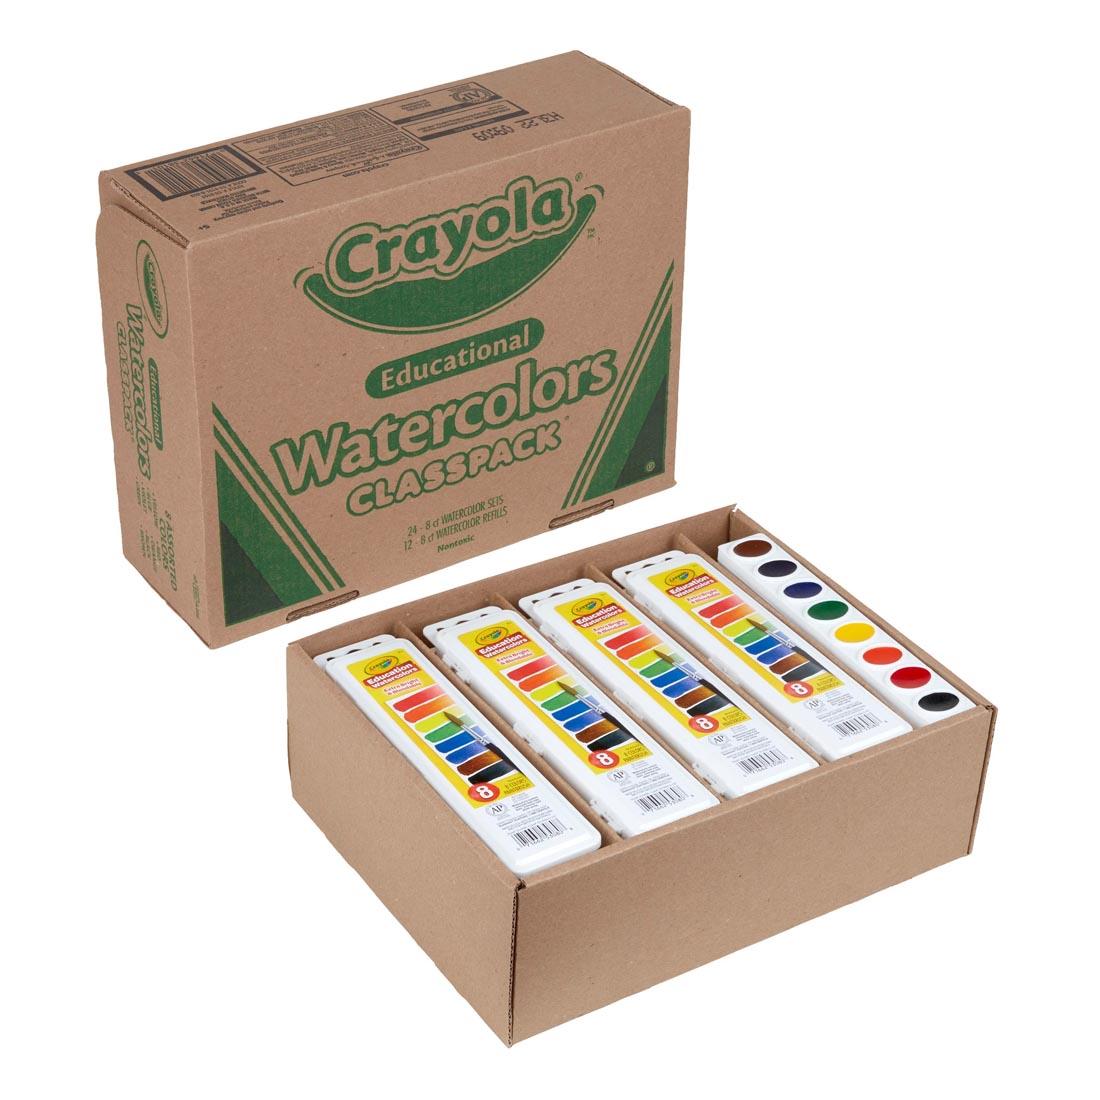 Crayola Oval Pan Watercolors Classpack Box shown open and closed